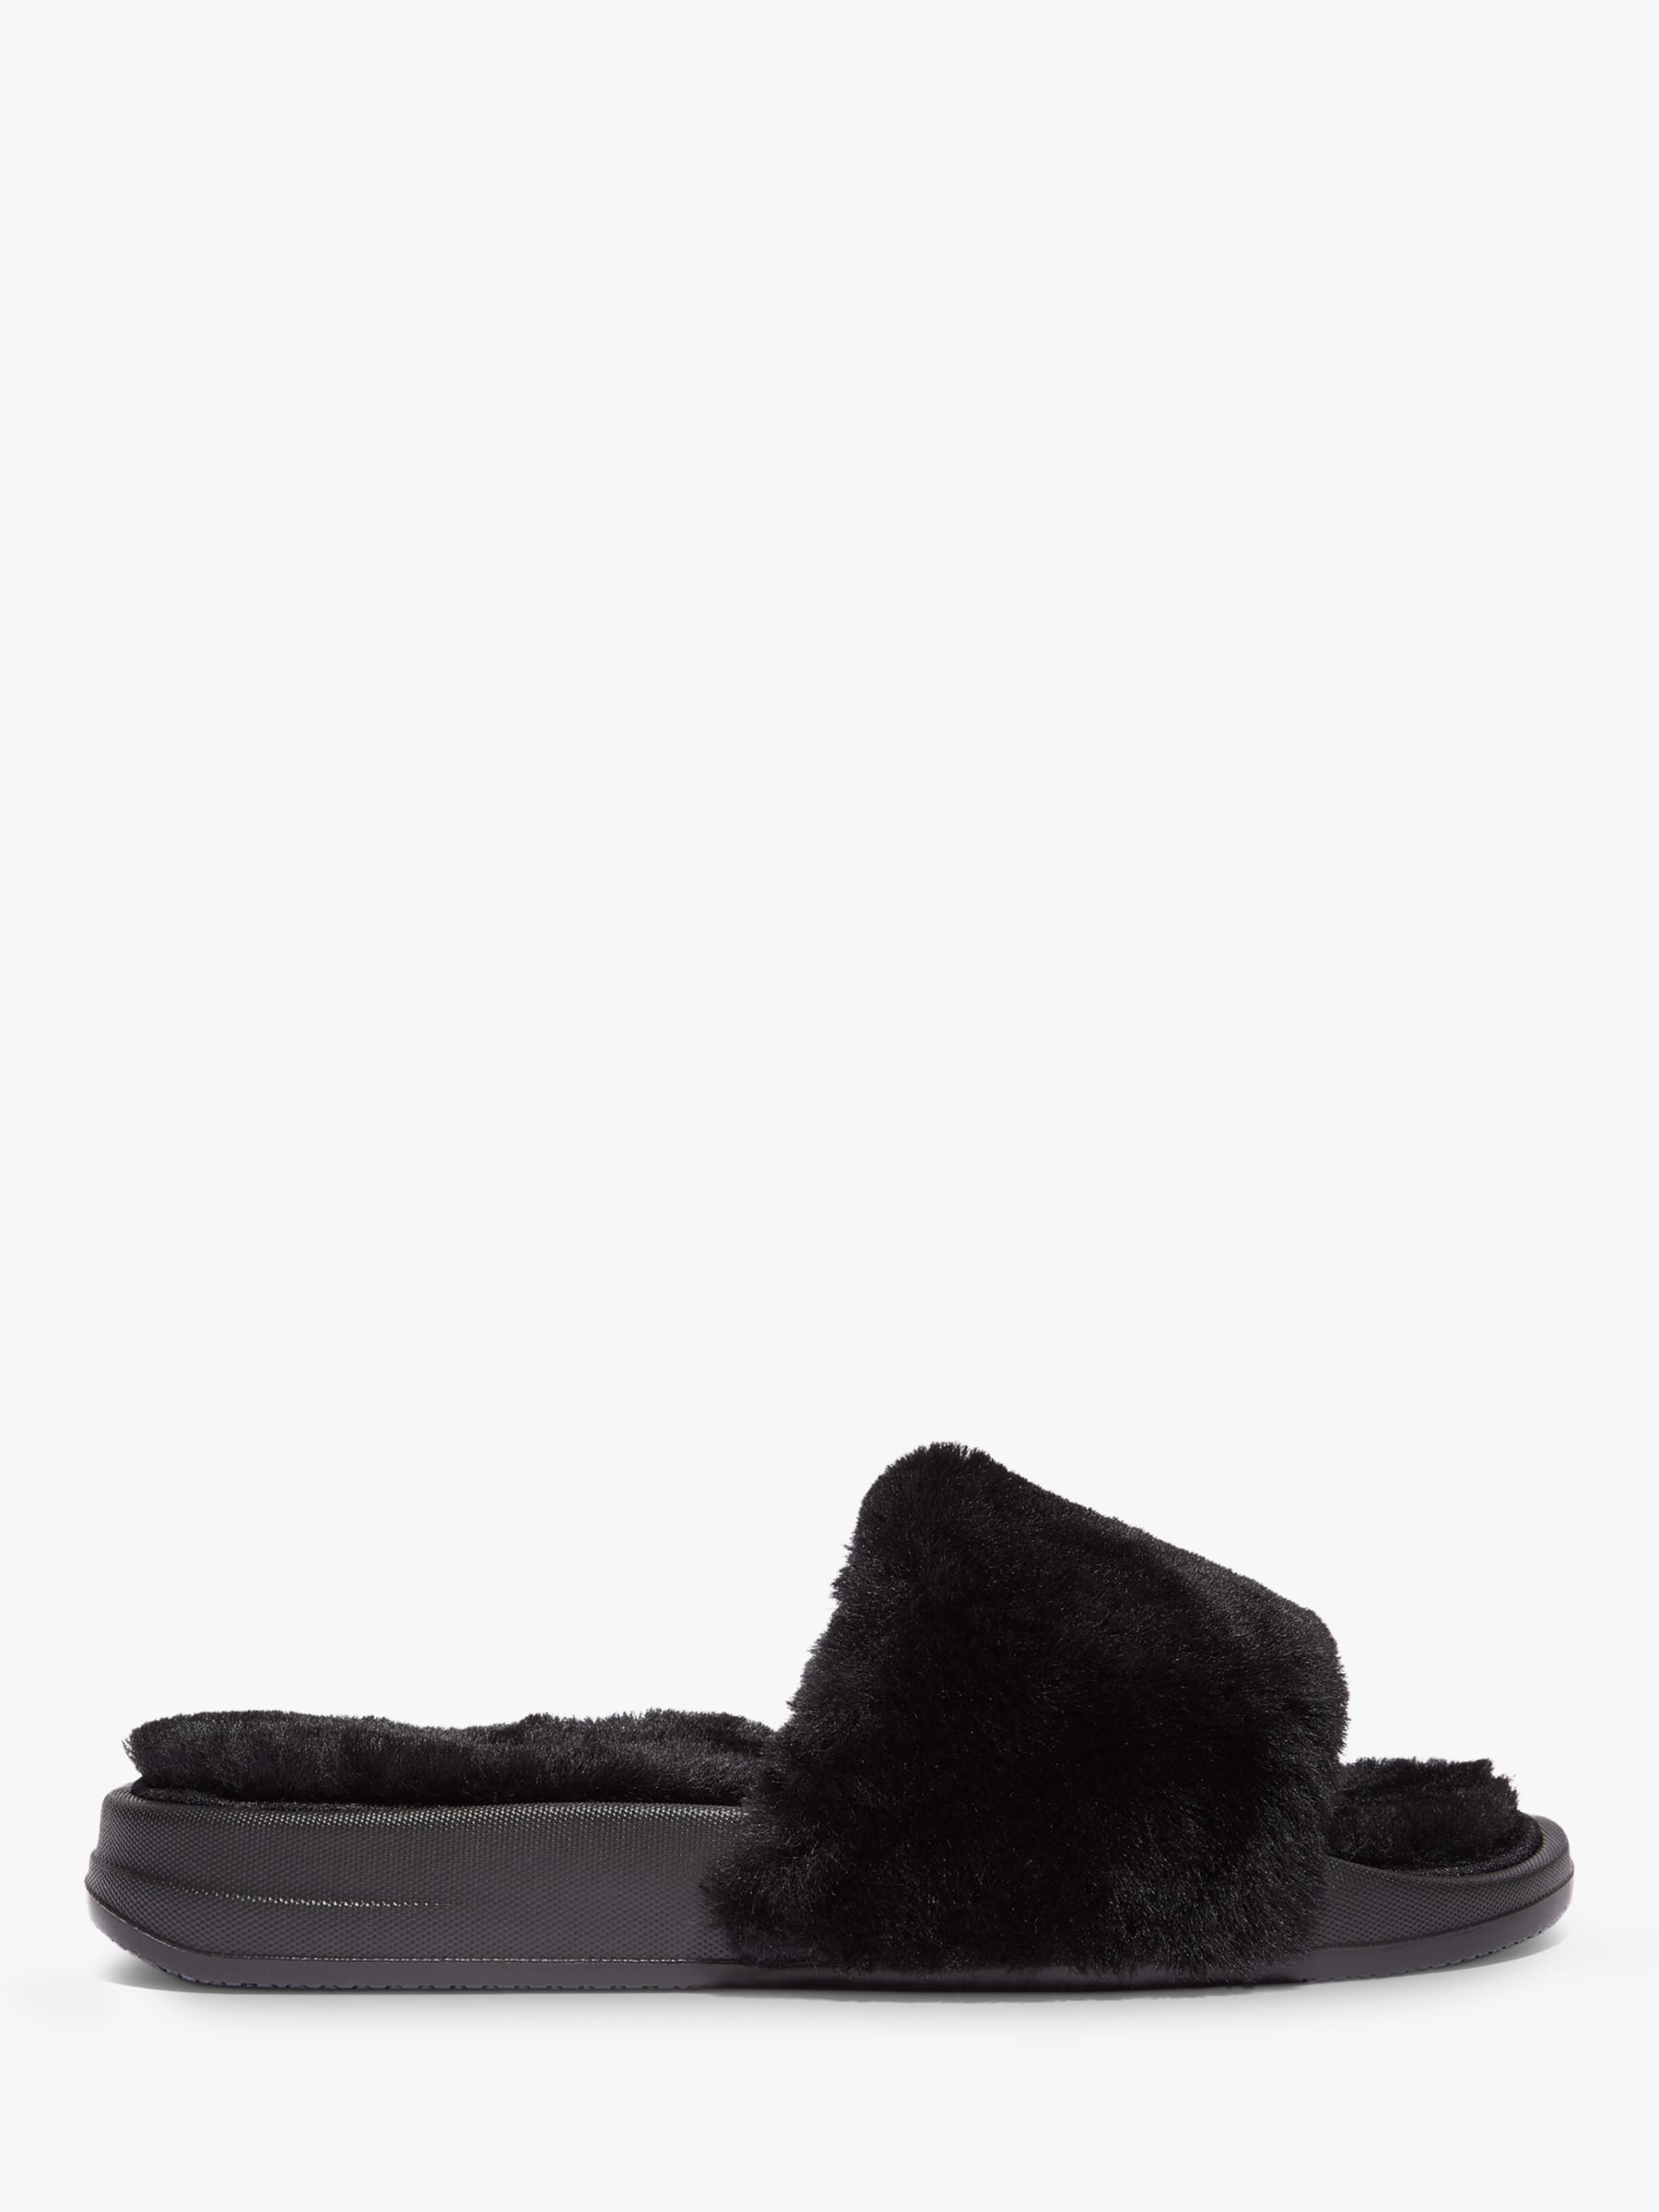 FitFlop IQushion Shearling Sliders, All Black at John Lewis & Partners